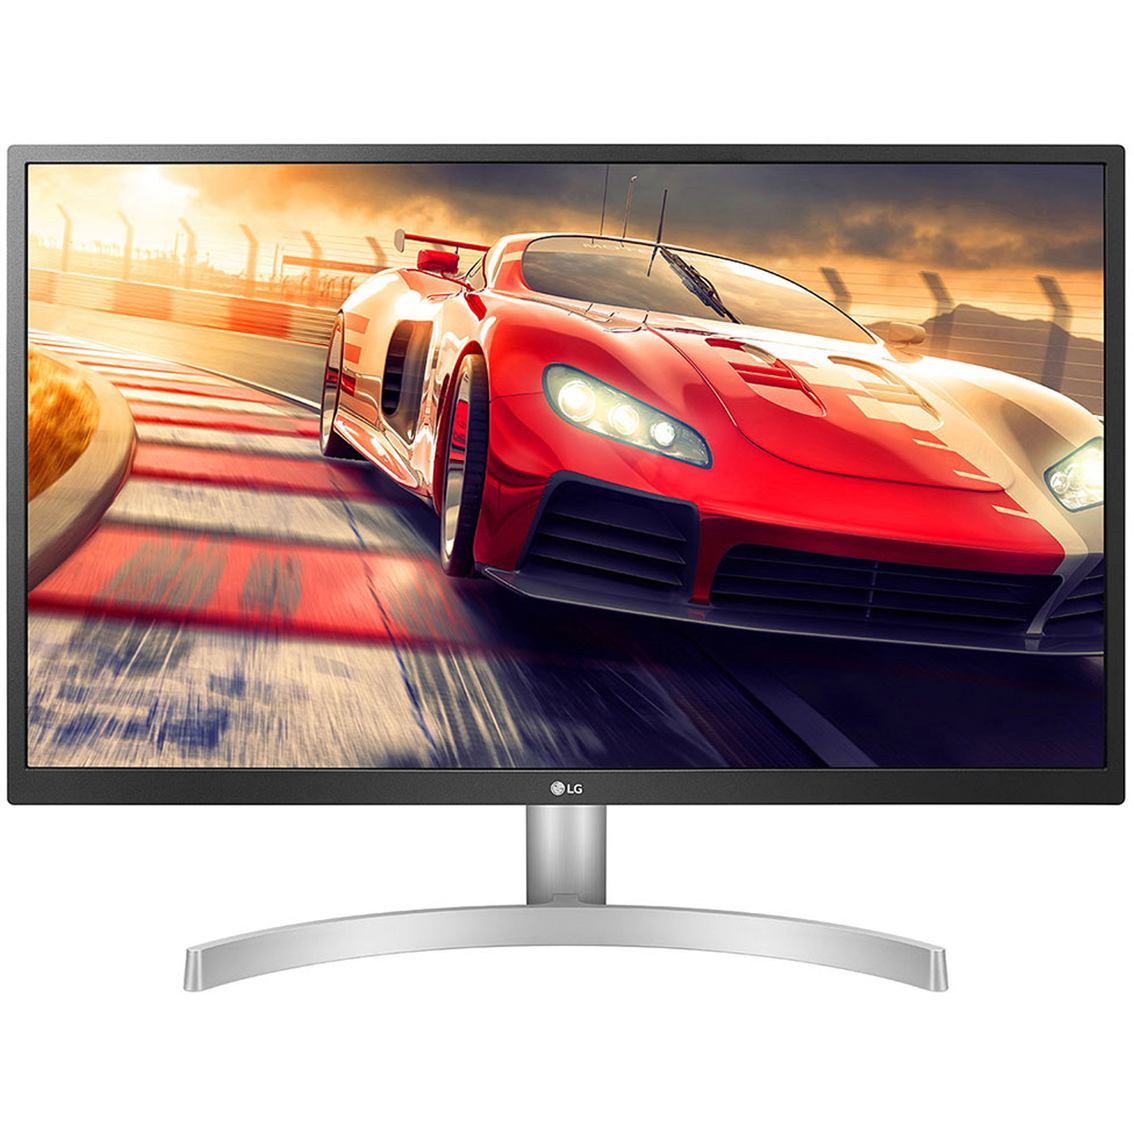 Lg 27 In. 4k Uhd Ips Led Monitor With Hdr | Computer Monitors